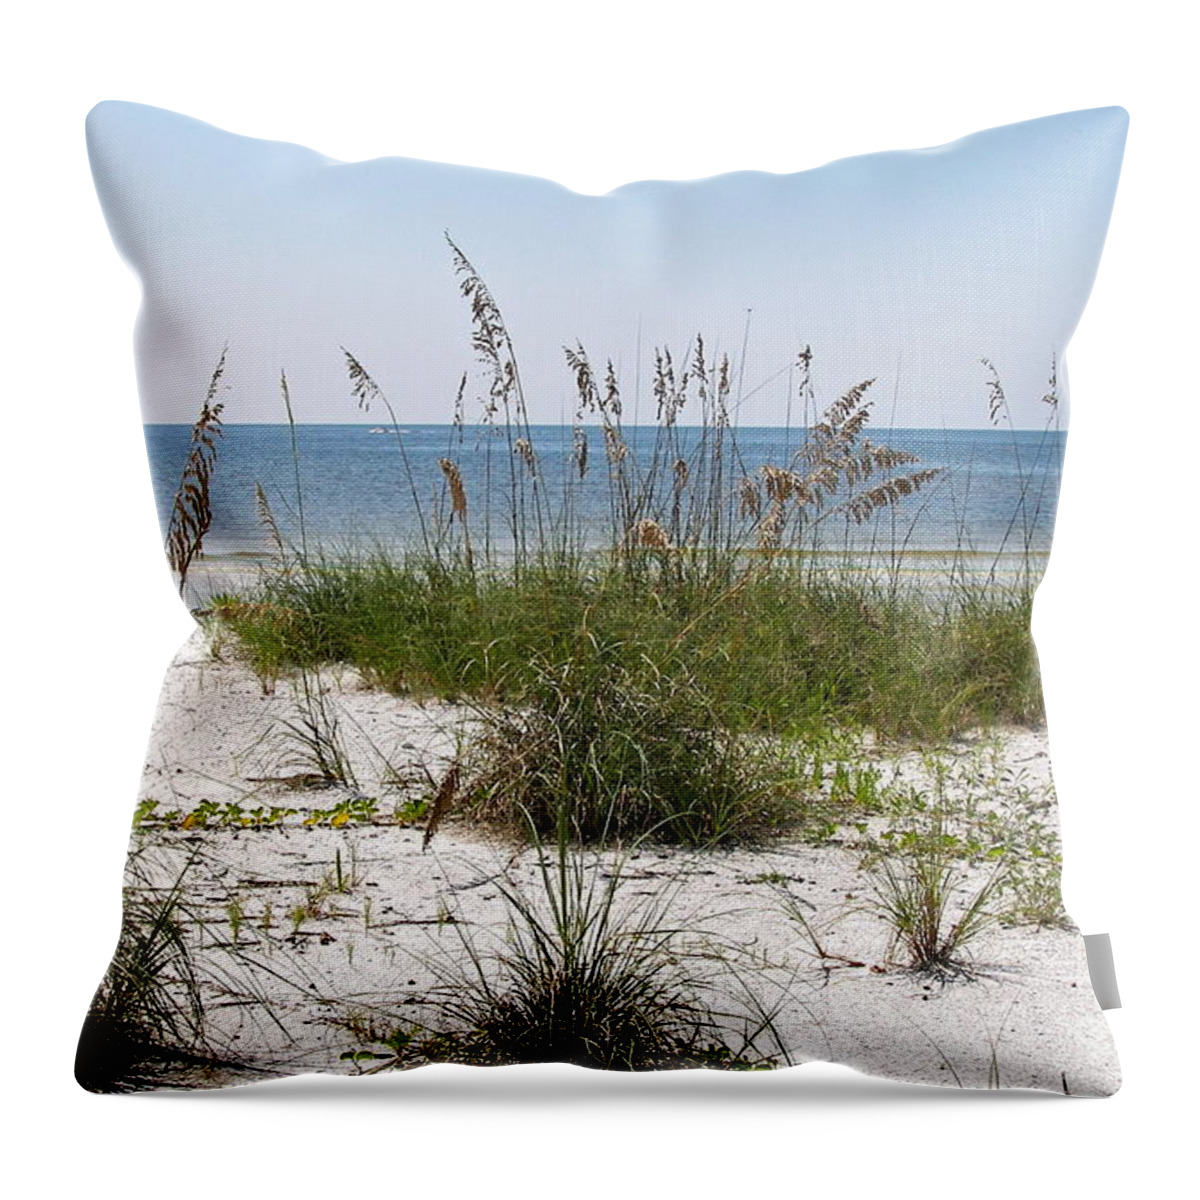 Ocean Throw Pillow featuring the photograph By The Sea by Carol Bradley